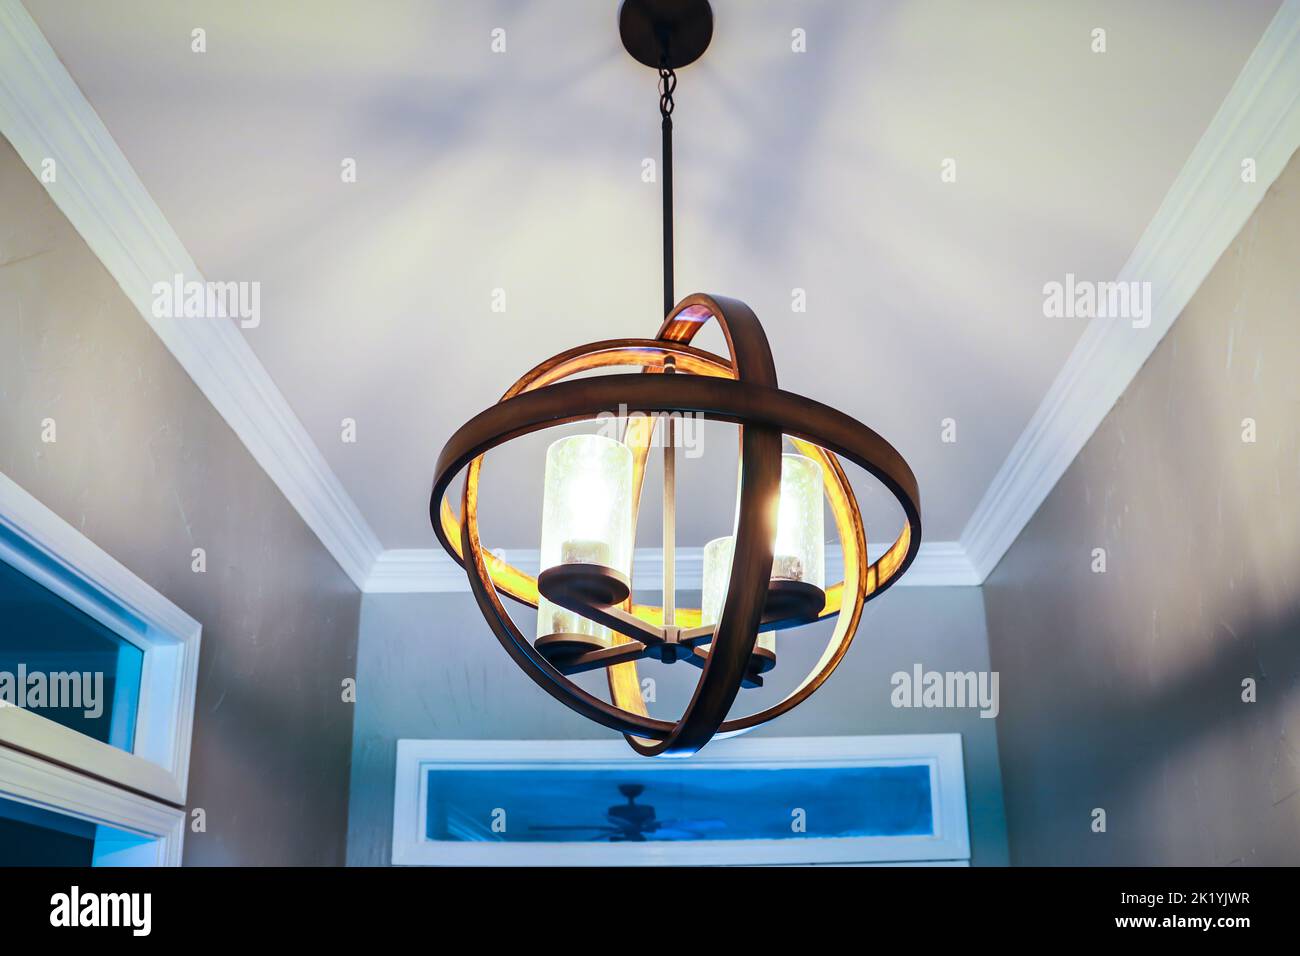 A suspended hanging orb light fixture in a front entrance of an Acadian style home or house. Stock Photo